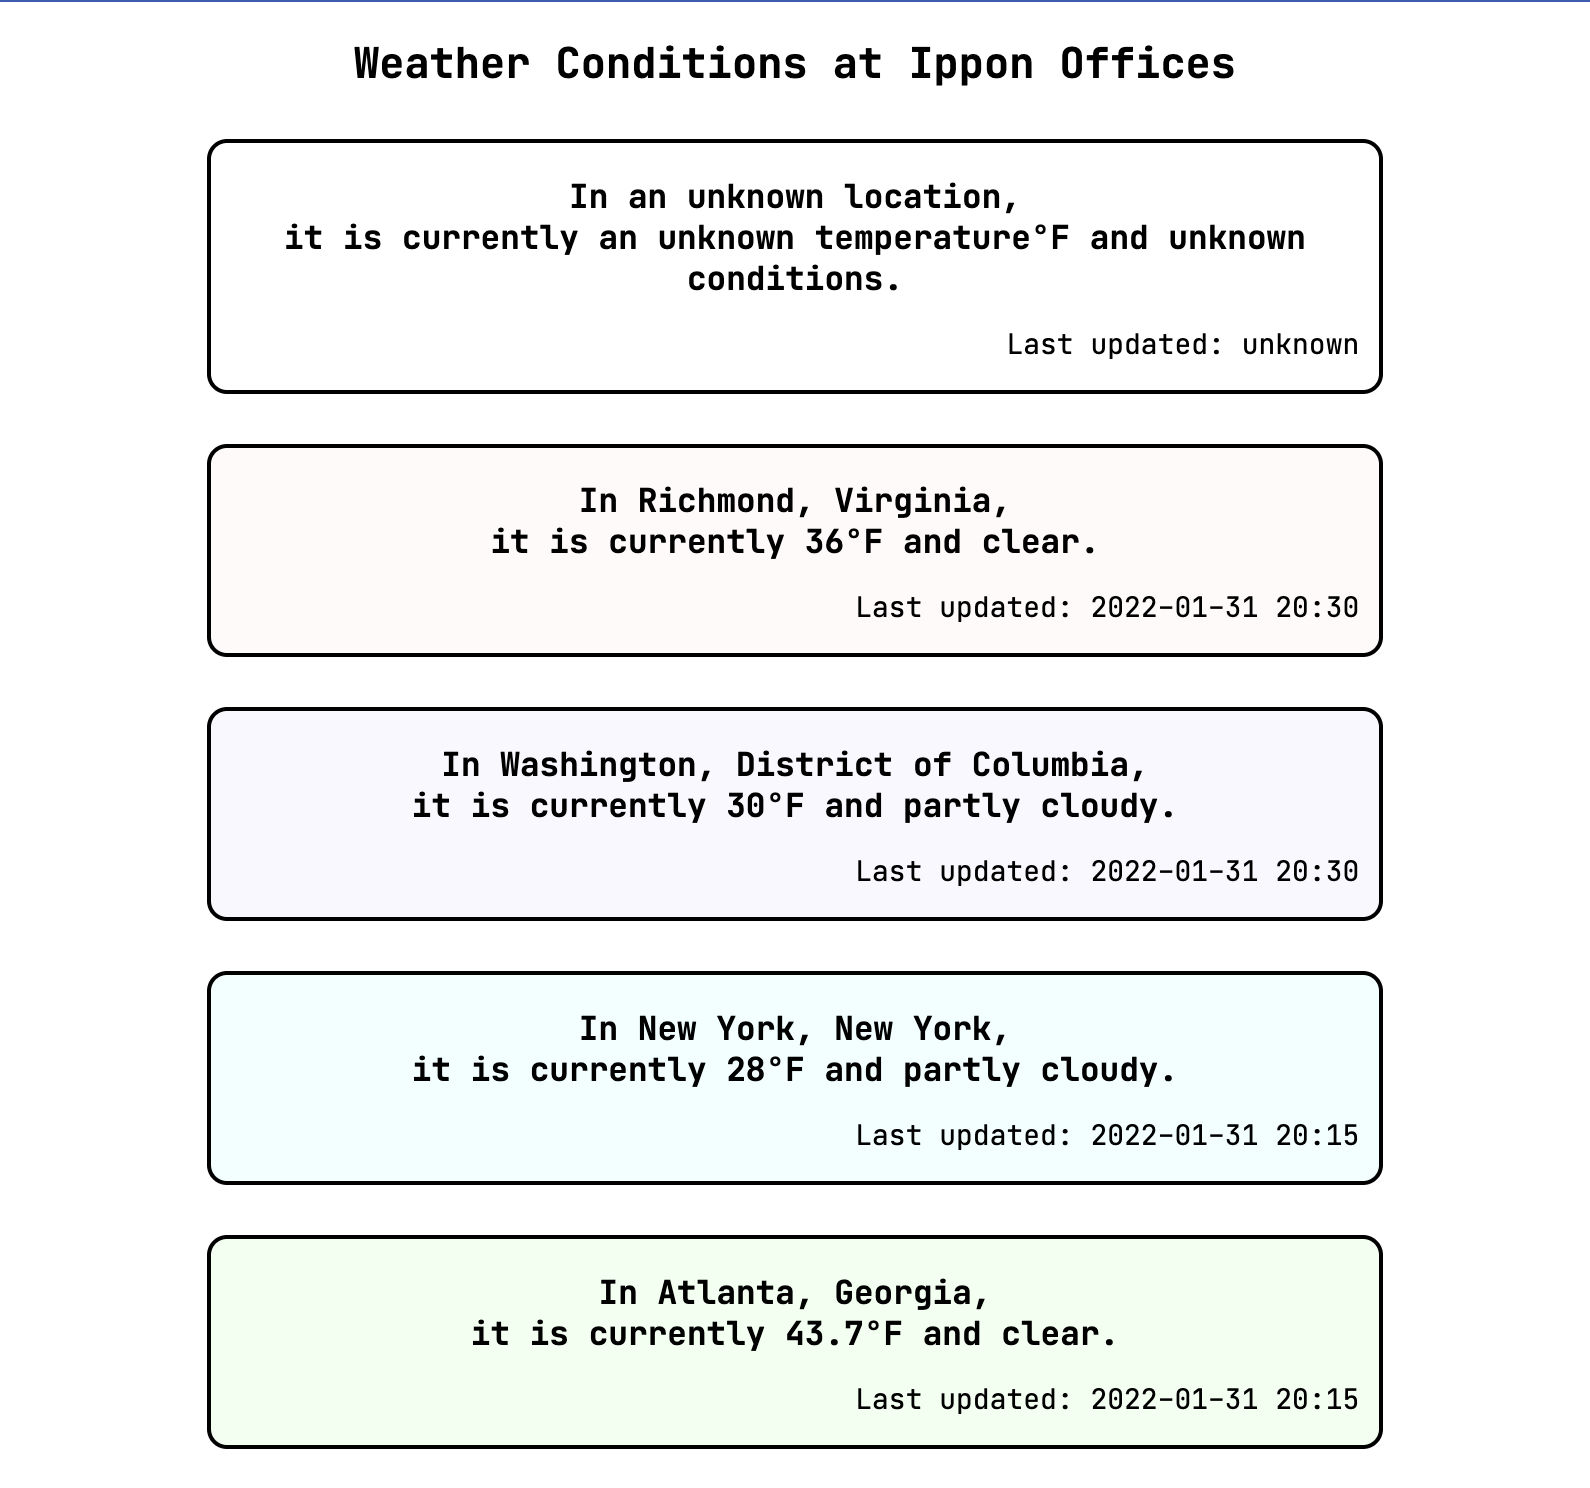 Page output after adding the default text to show when no attribute is passed in. The no-attribute card has a white background, and the sentence describing the weather for that card is "In an unknown location, it is currently an unknown temperature°F and unknown conditions.". 